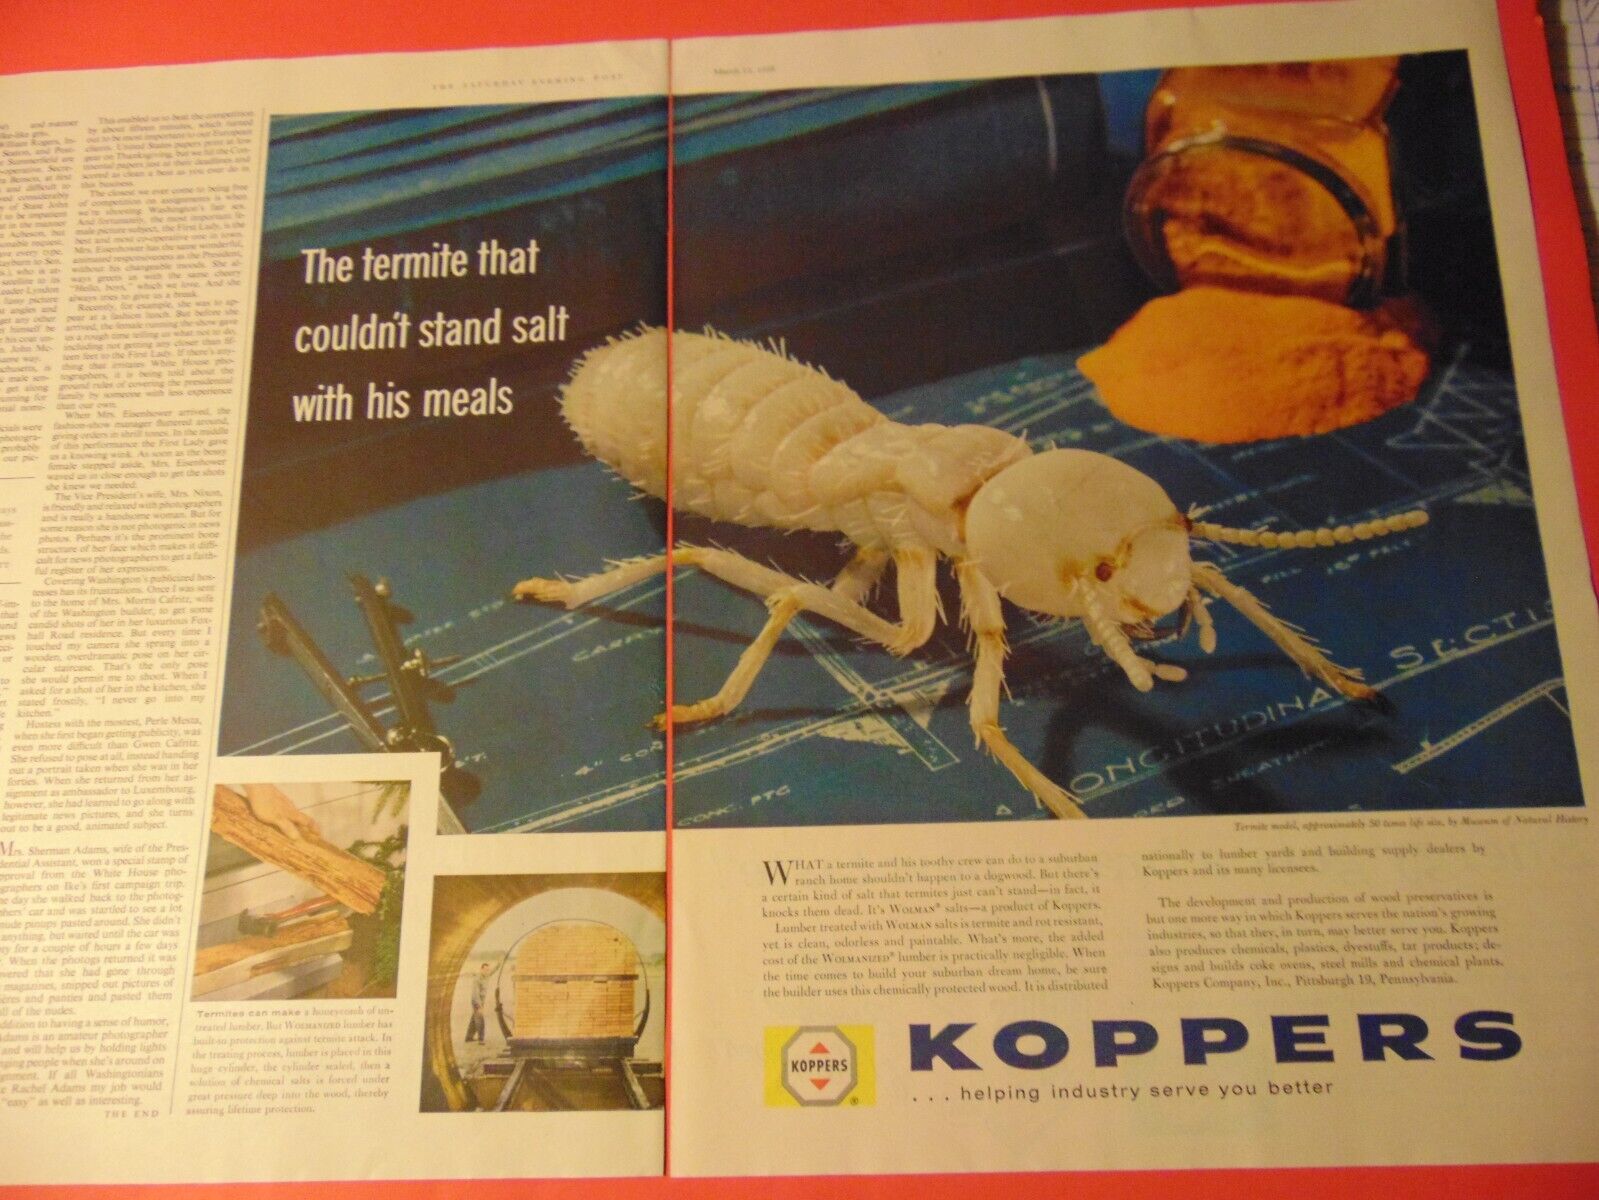 1958 KOPPERS wood protection from Termites vintage print ad